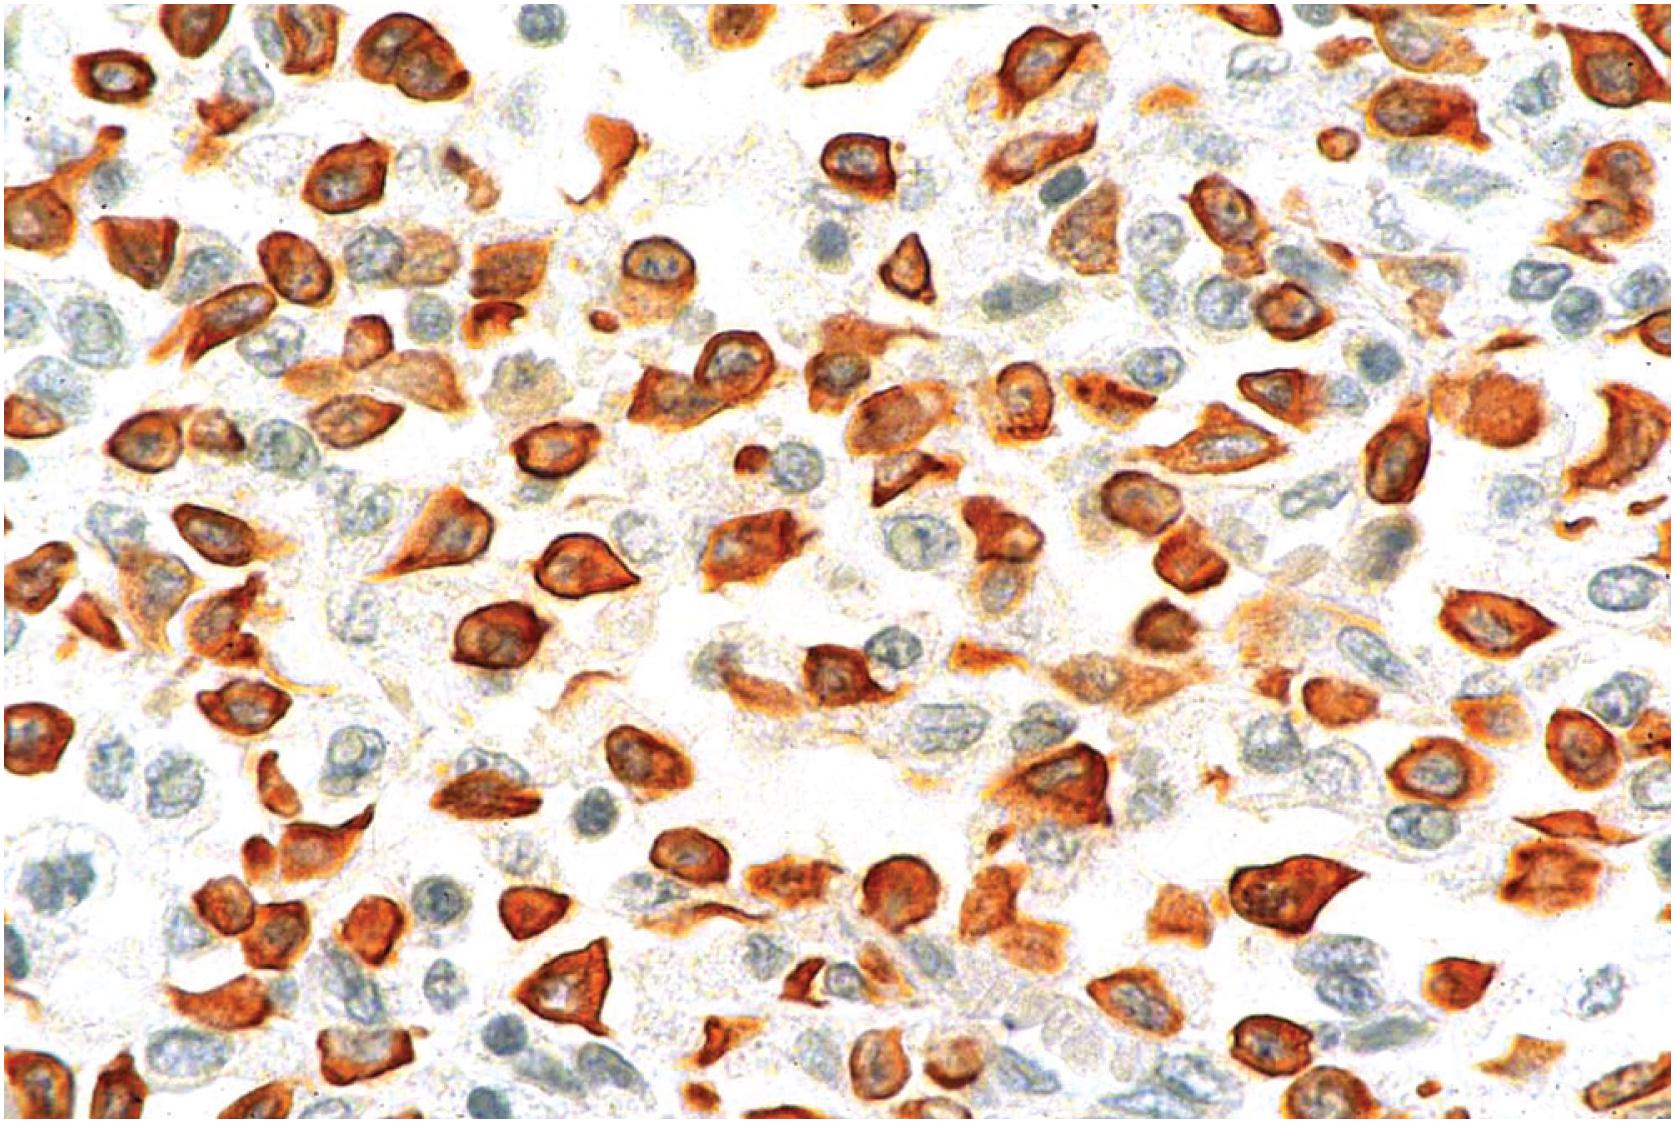 Fig. 13.17, Diffuse tenosynovial giant cell tumor. Immunohistochemical stain for desmin shows numerous positive cells.